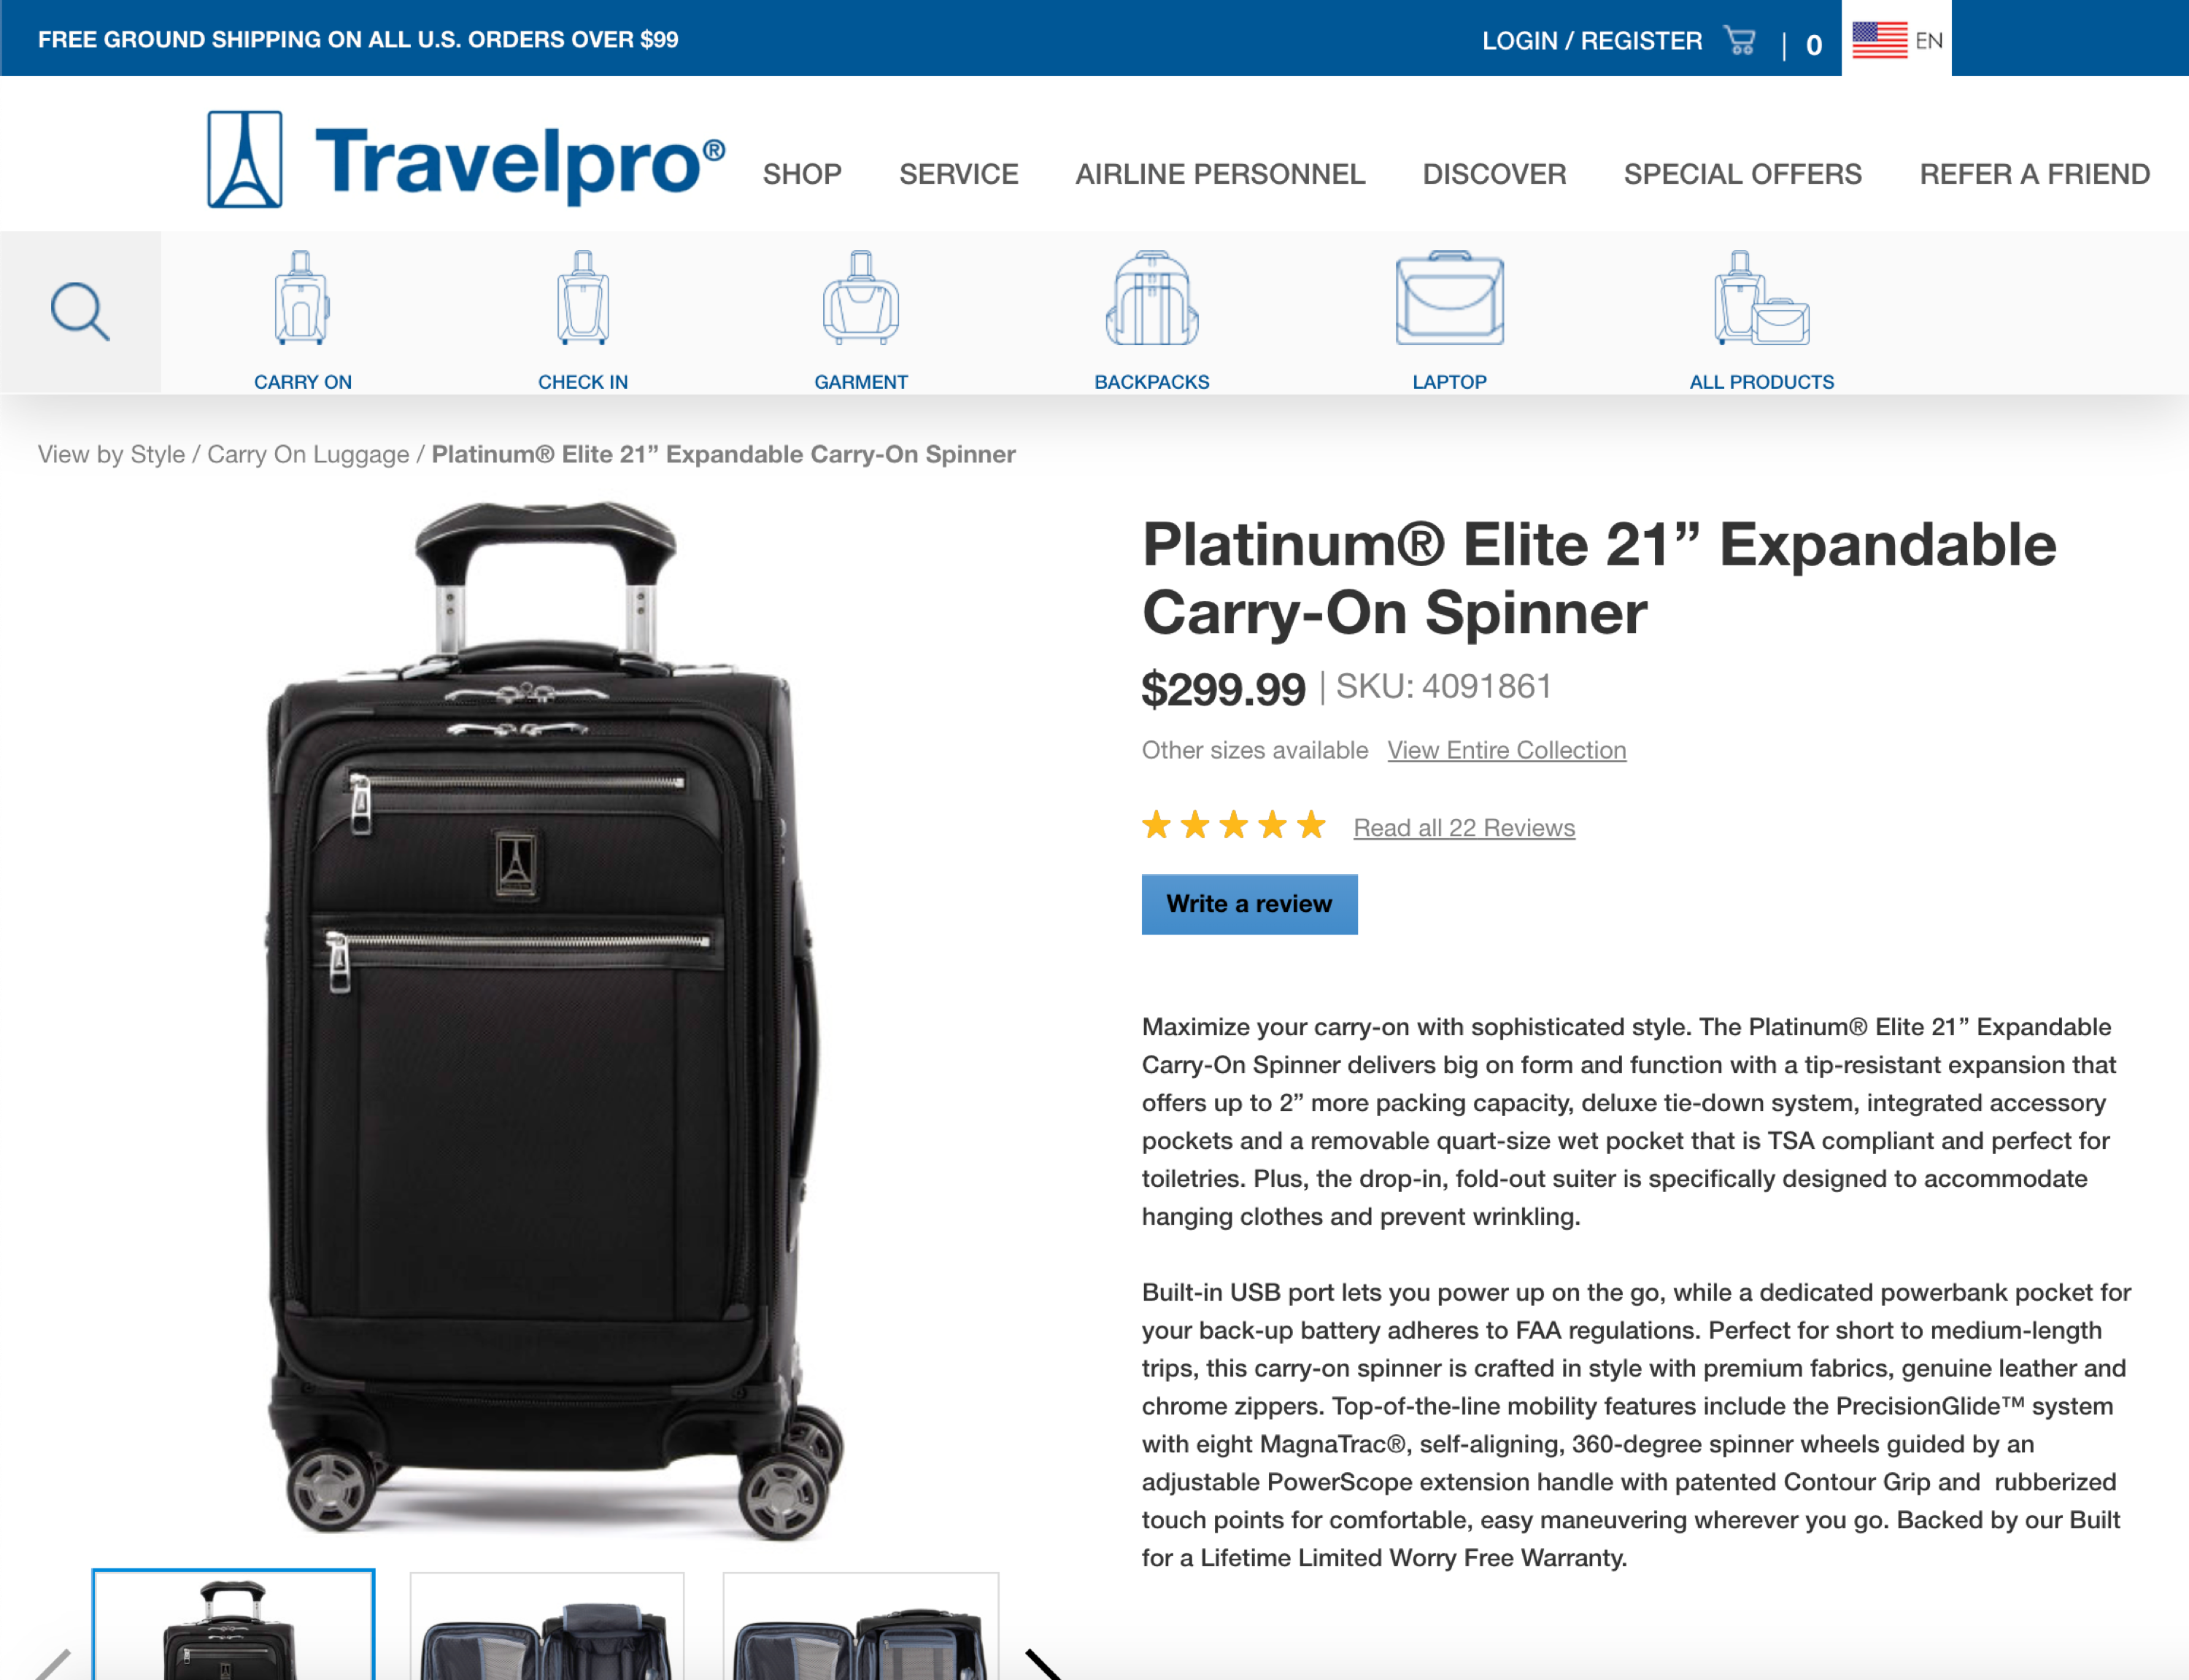 Travelpro.com carry on luggage product page.